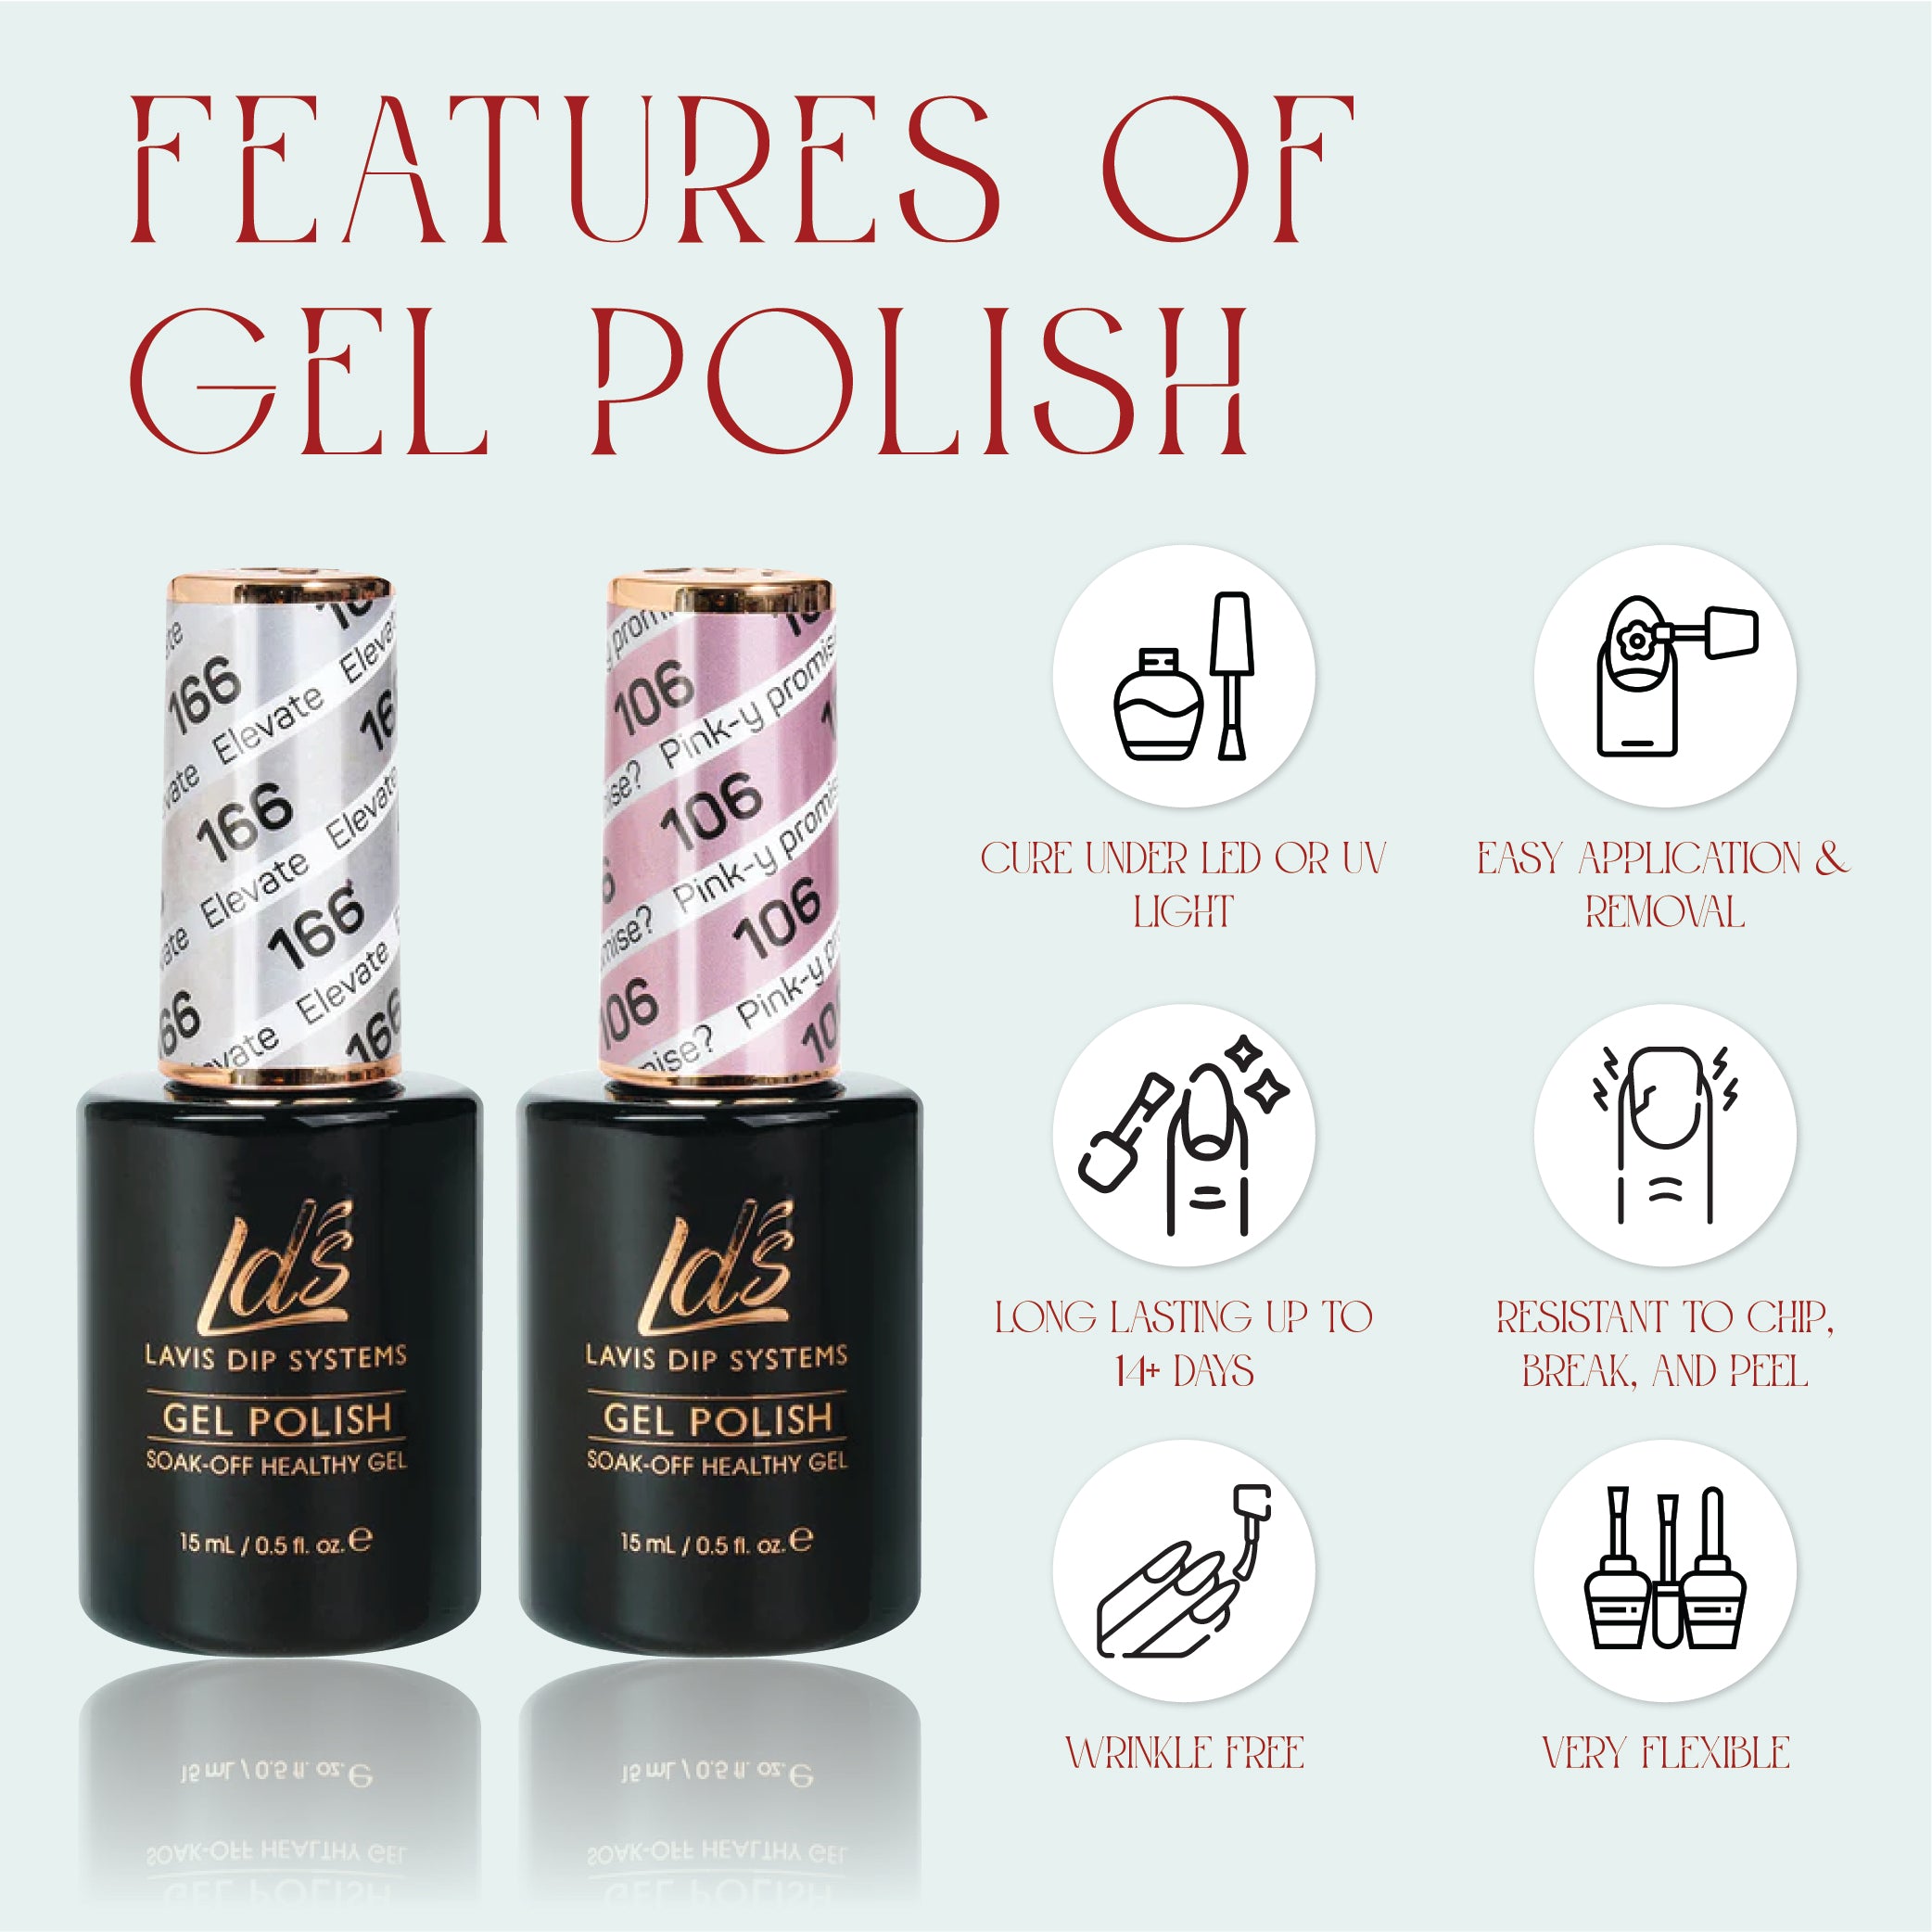 LDS 111 Nothing But Blue Skies - LDS Healthy Gel Polish & Matching Nail Lacquer Duo Set - 0.5oz